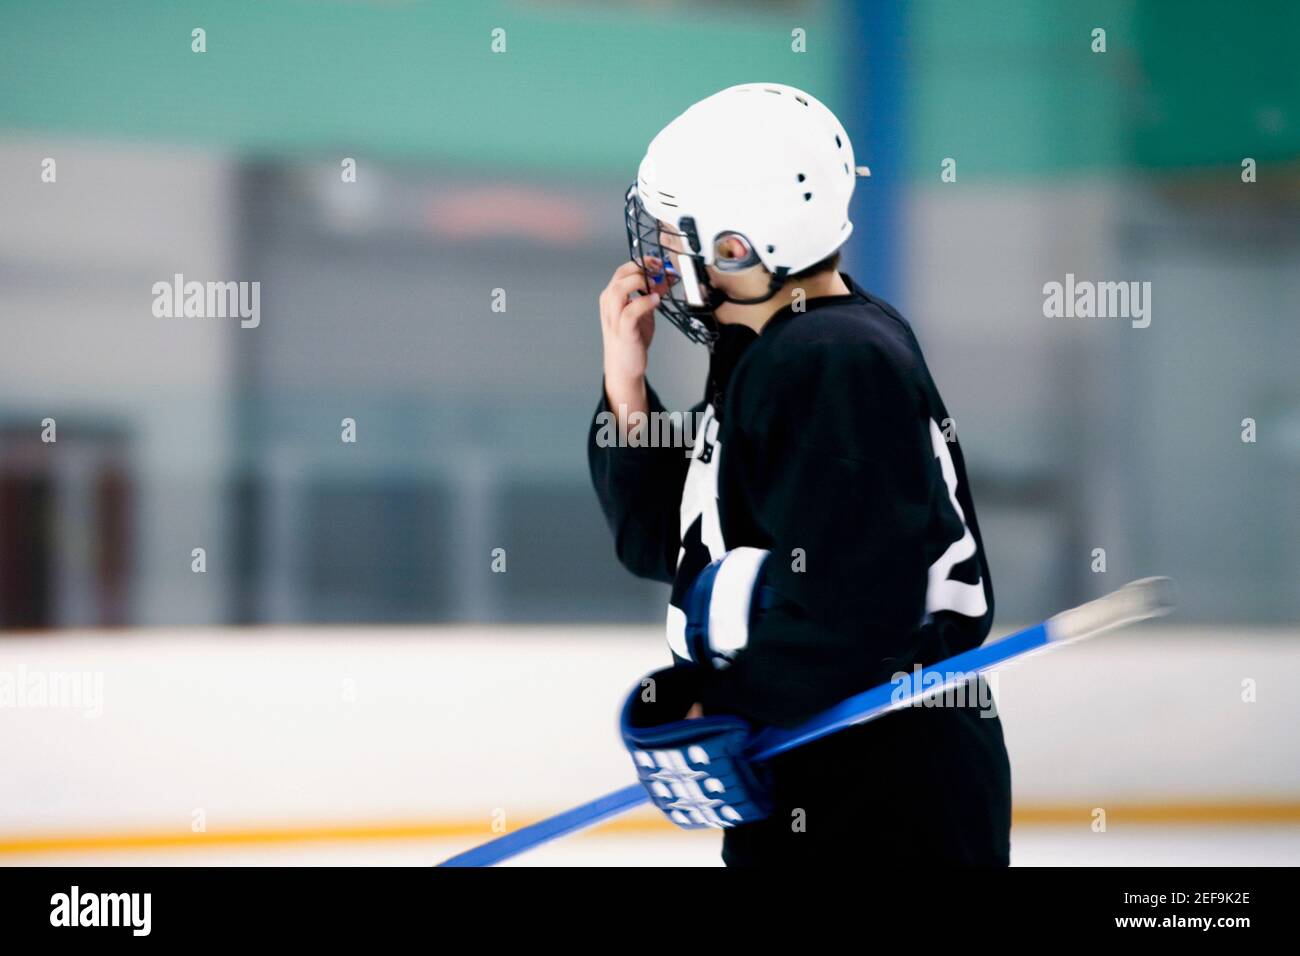 Side profile of an ice hockey player holding an ice hockey stick Stock Photo